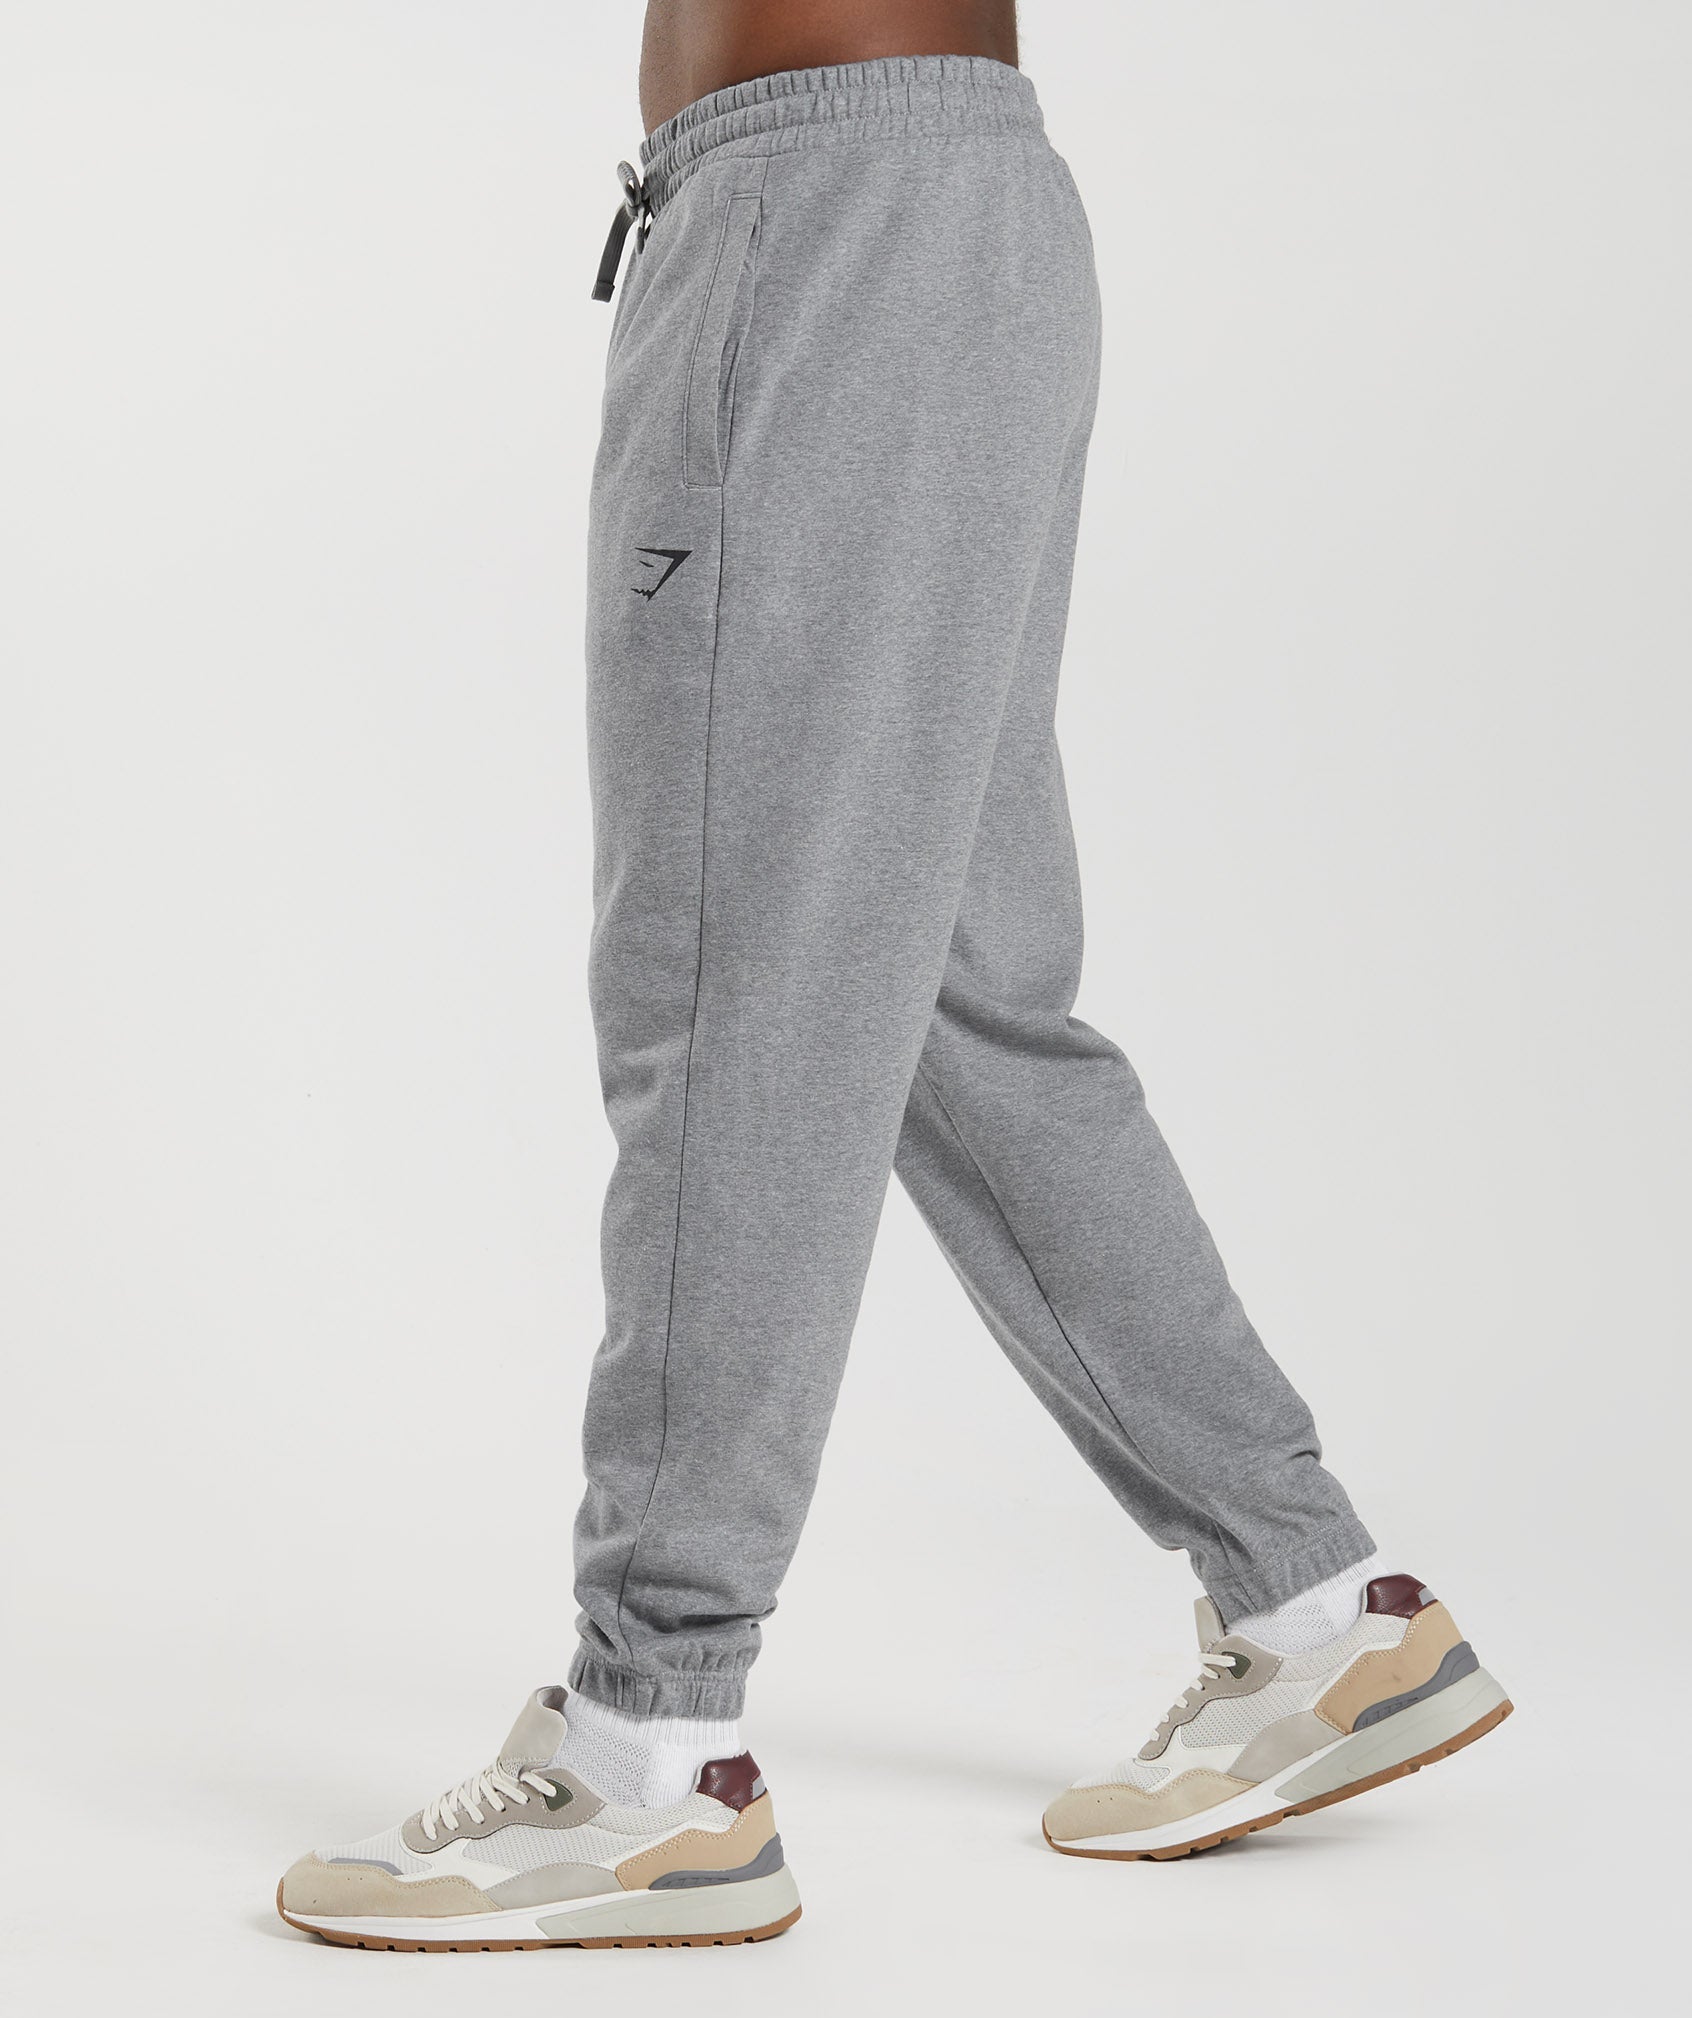 Women's Athletic Essential Jersey Flare Joggers in Cadet Grey Marl